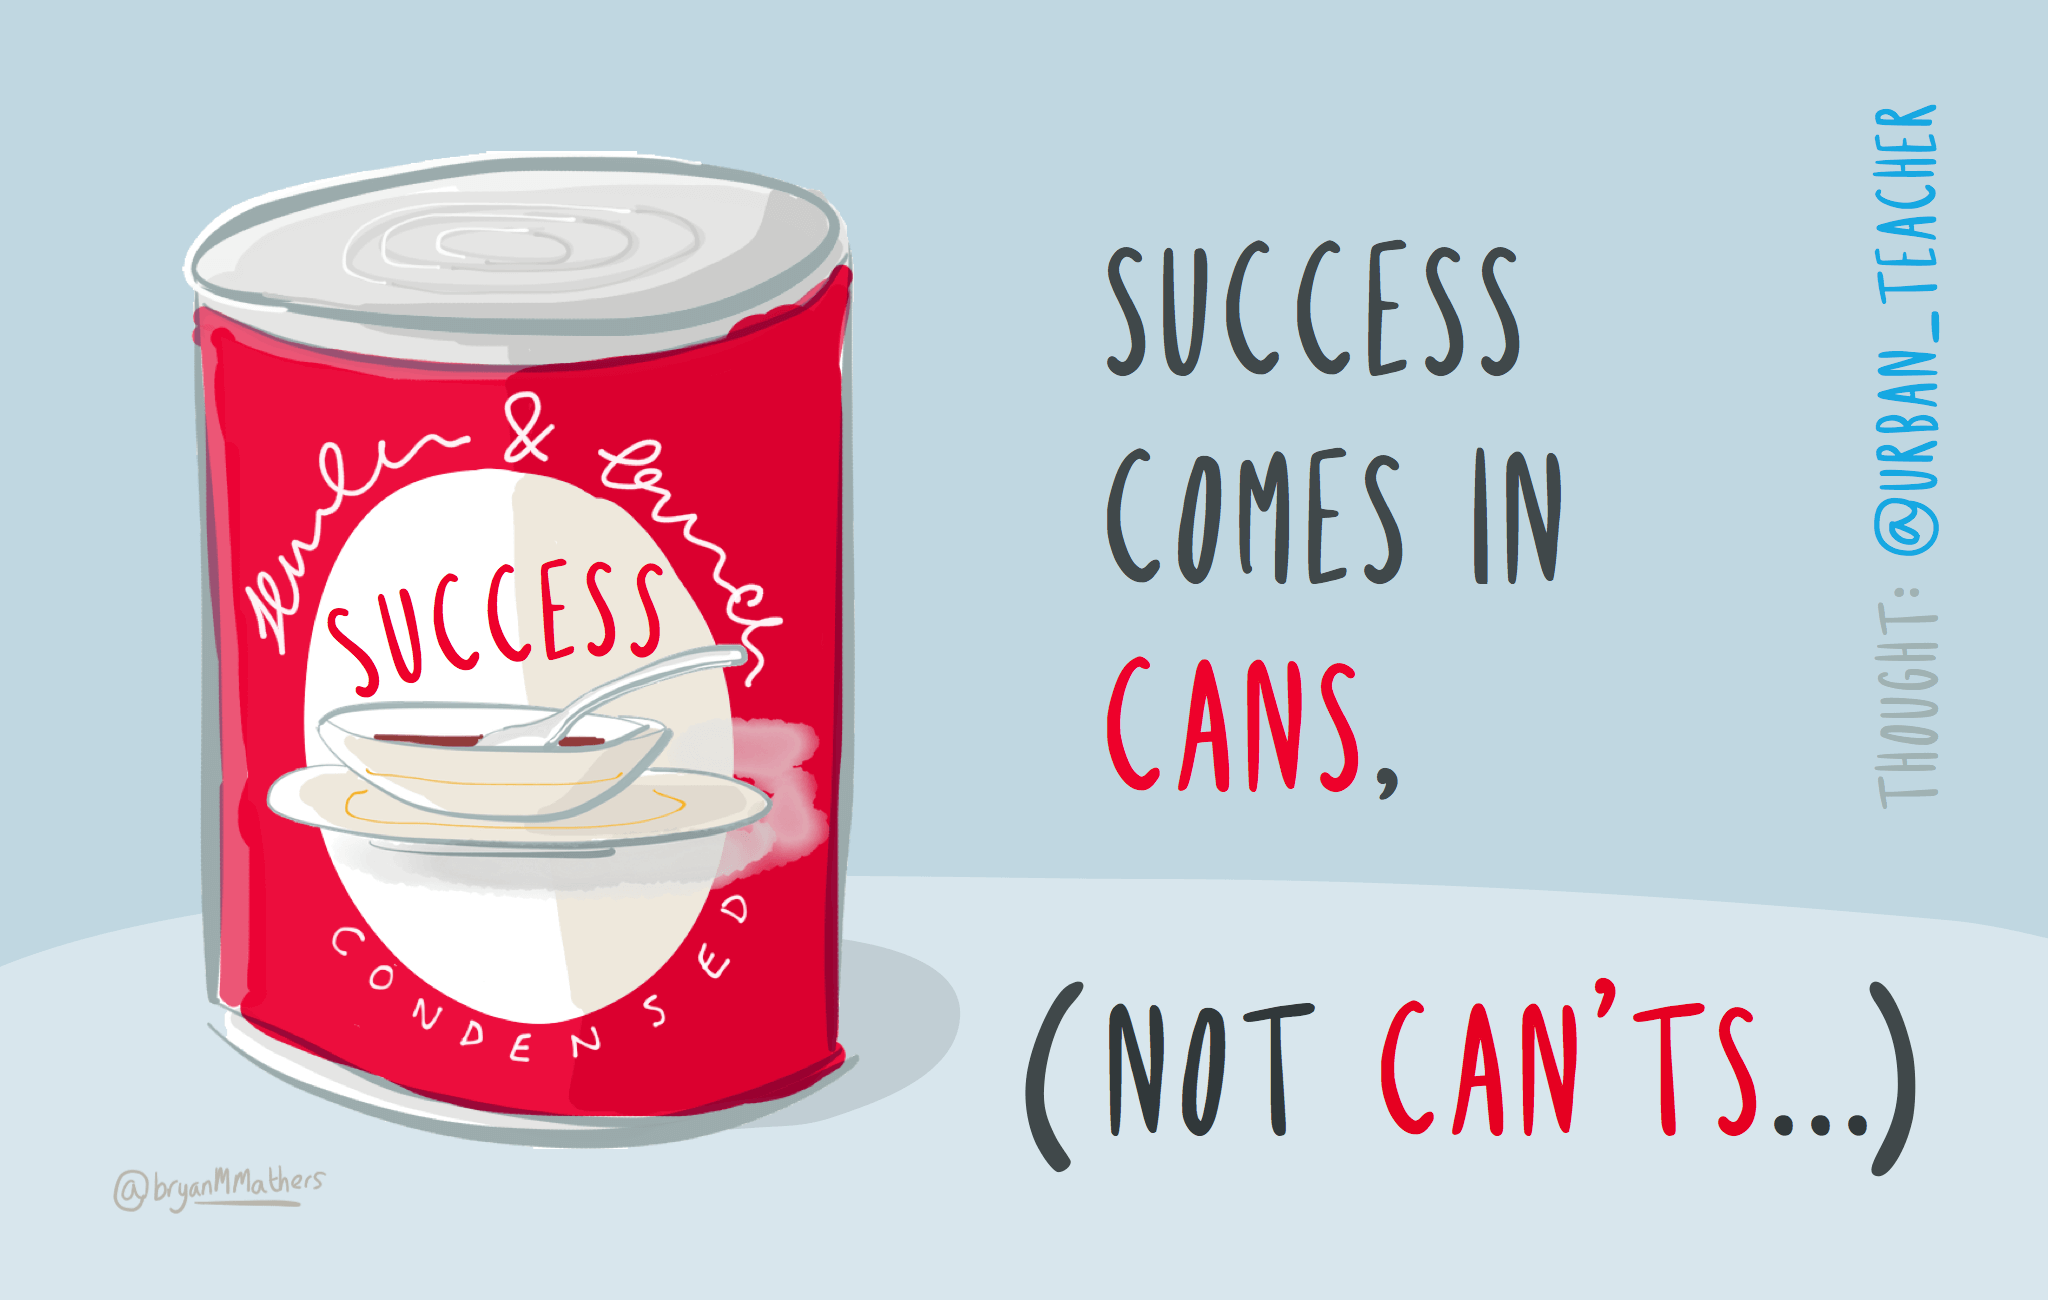 Success comes in Cans